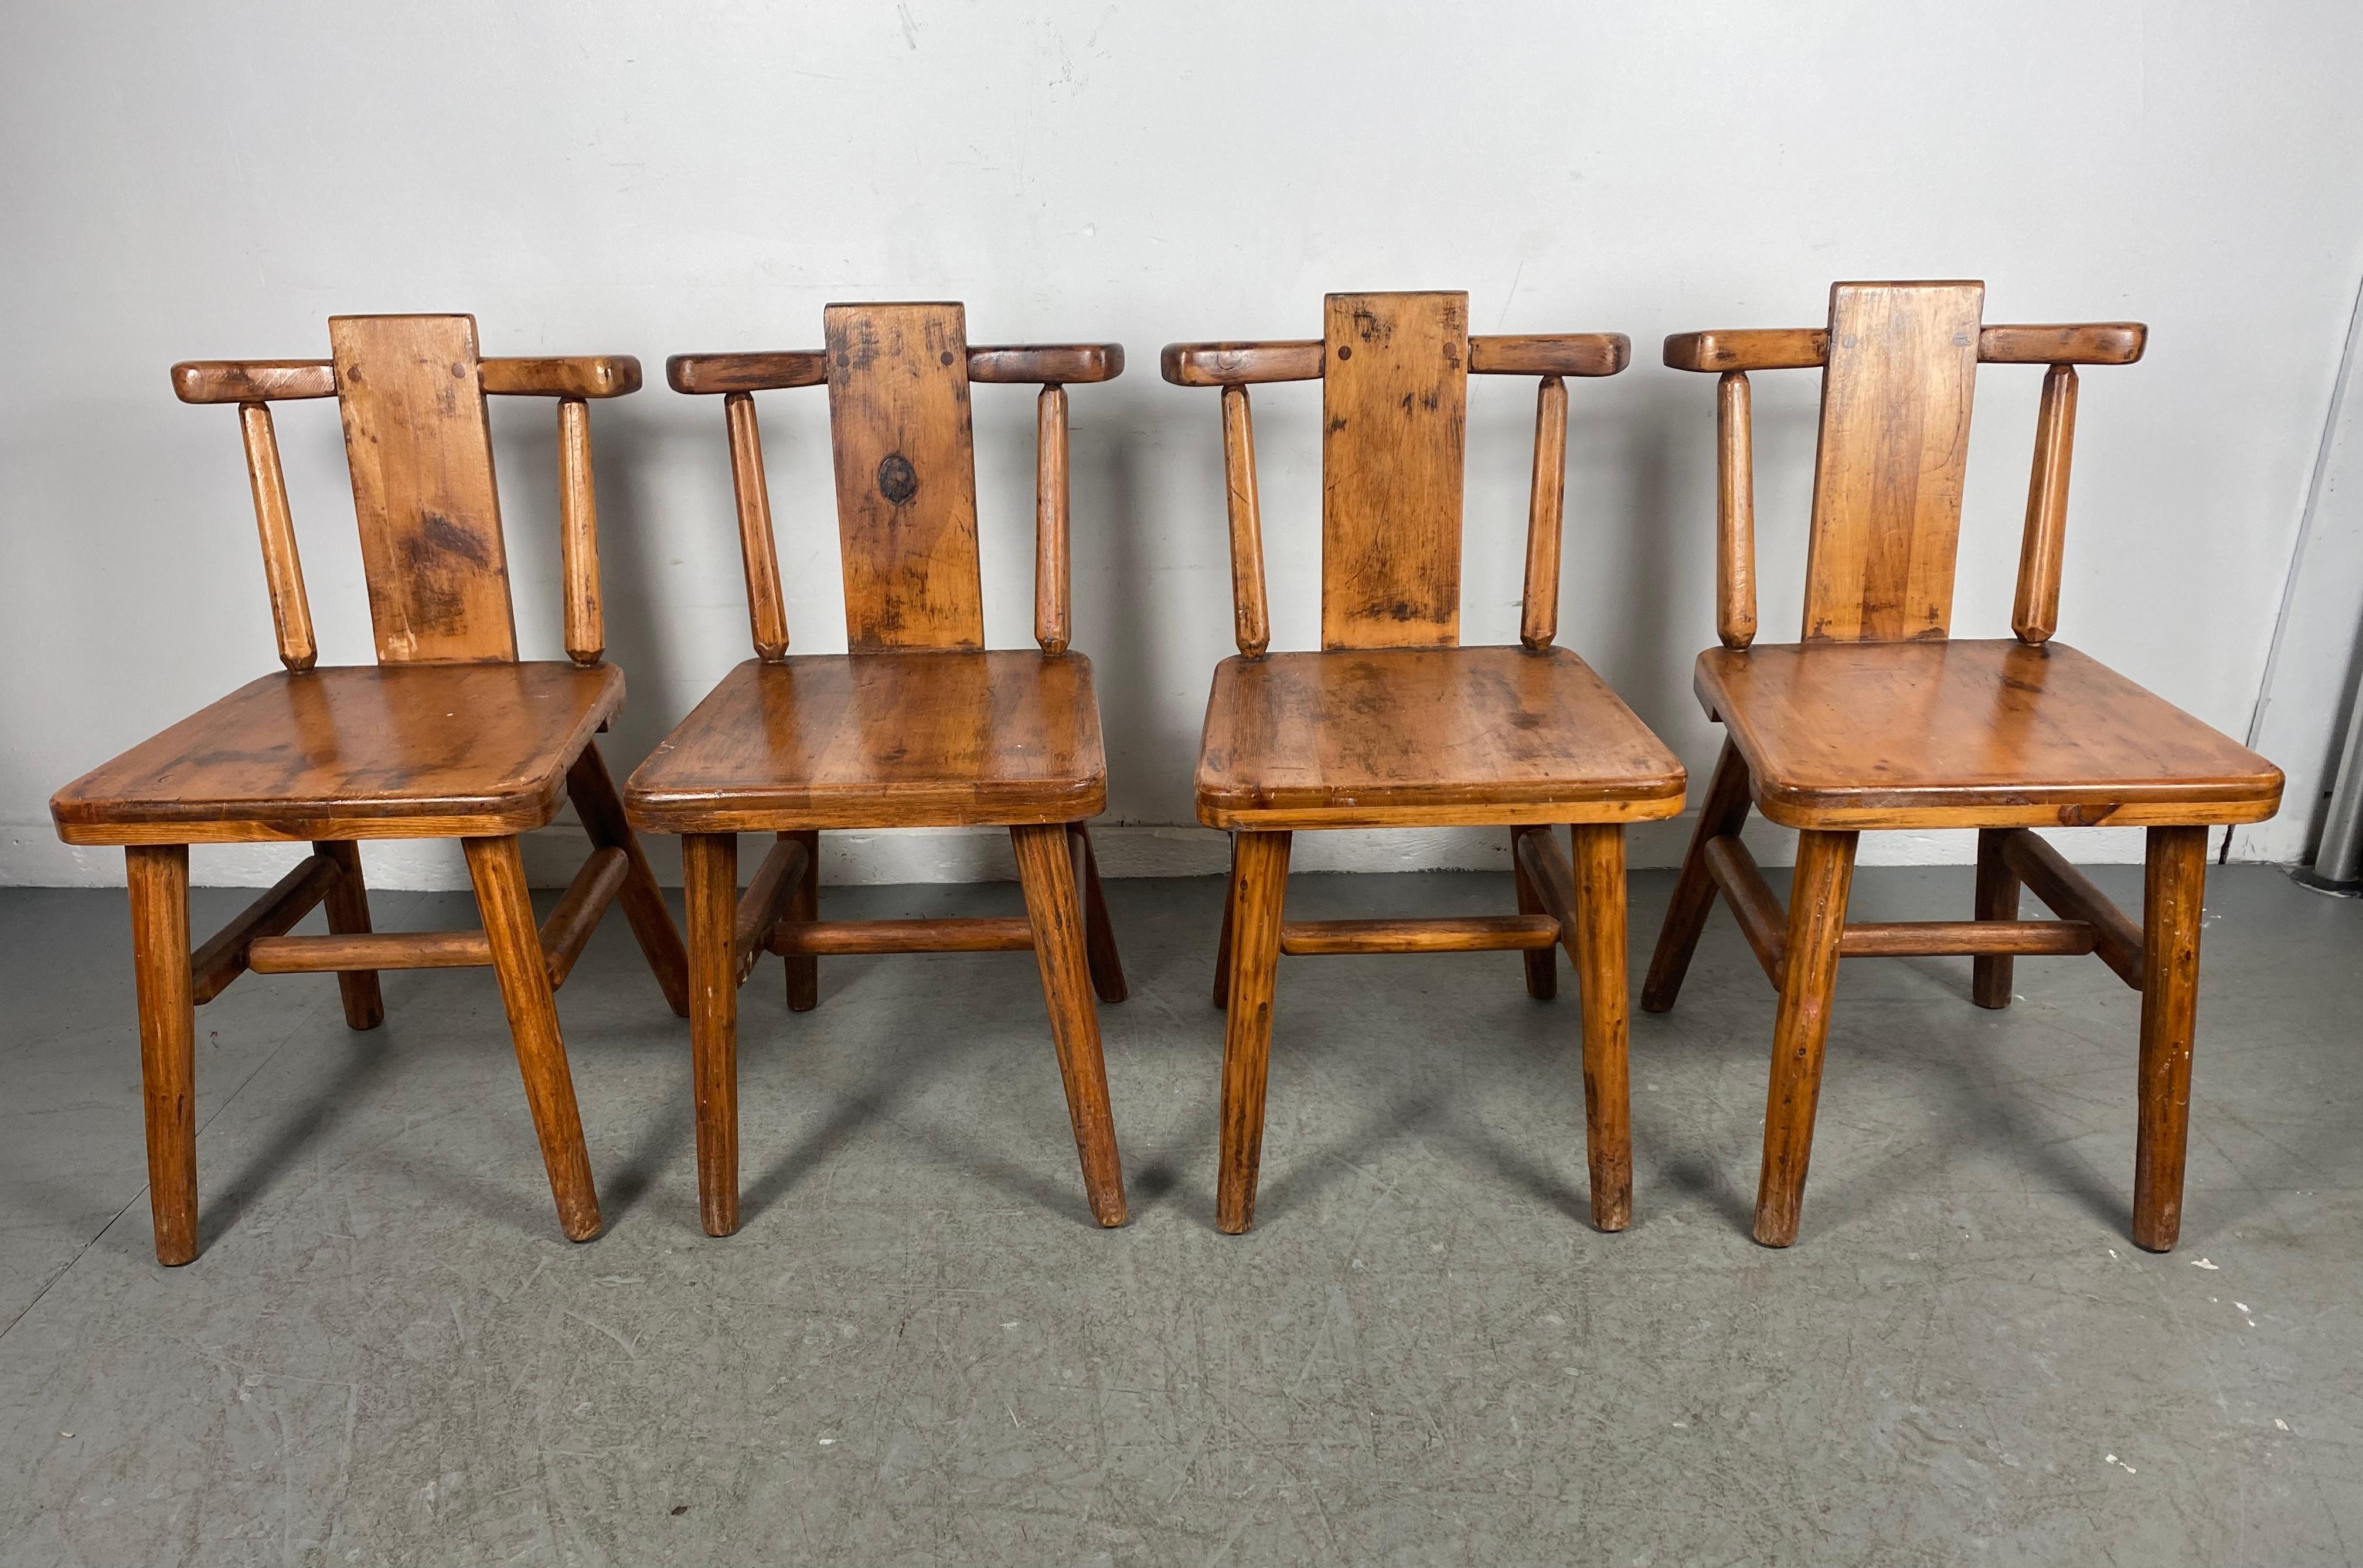 Modern Farmhouse, Cottage / Cabin Solid Wood Side Chairs by Sikes Chair Co 7